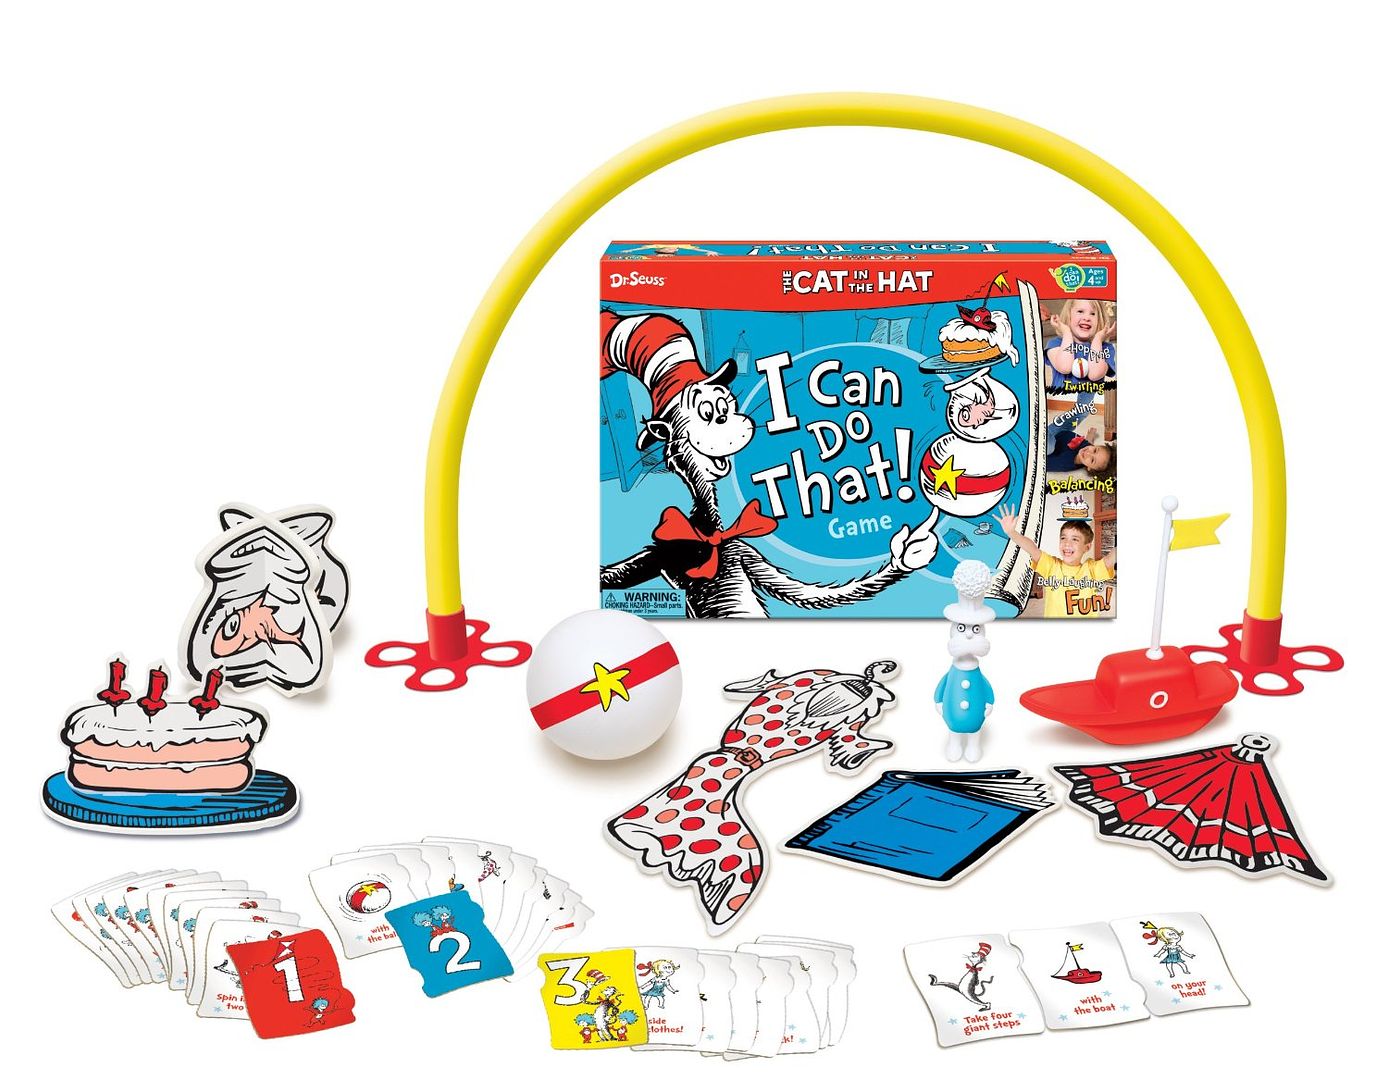 Cat in the Hat I Can Do That! Game: One of the best gifts for four year olds